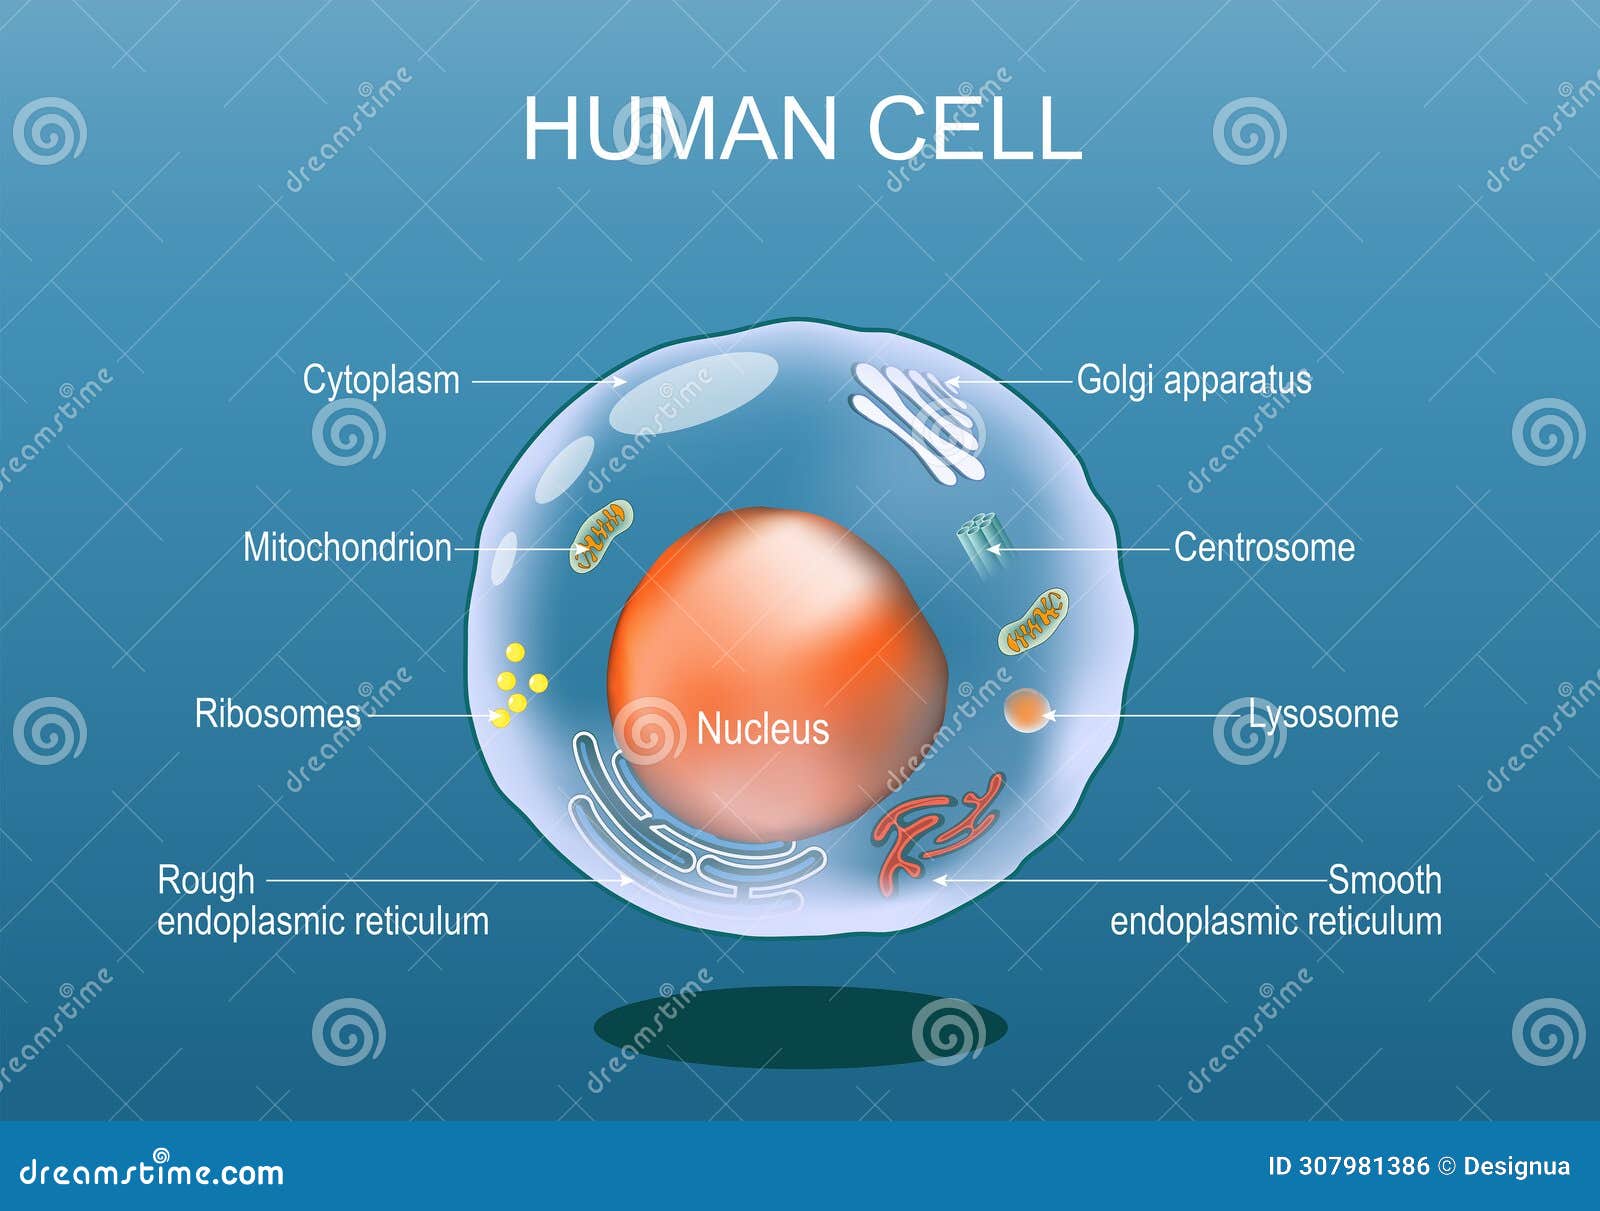 human cell anatomy. structure of a eukaryotic cell